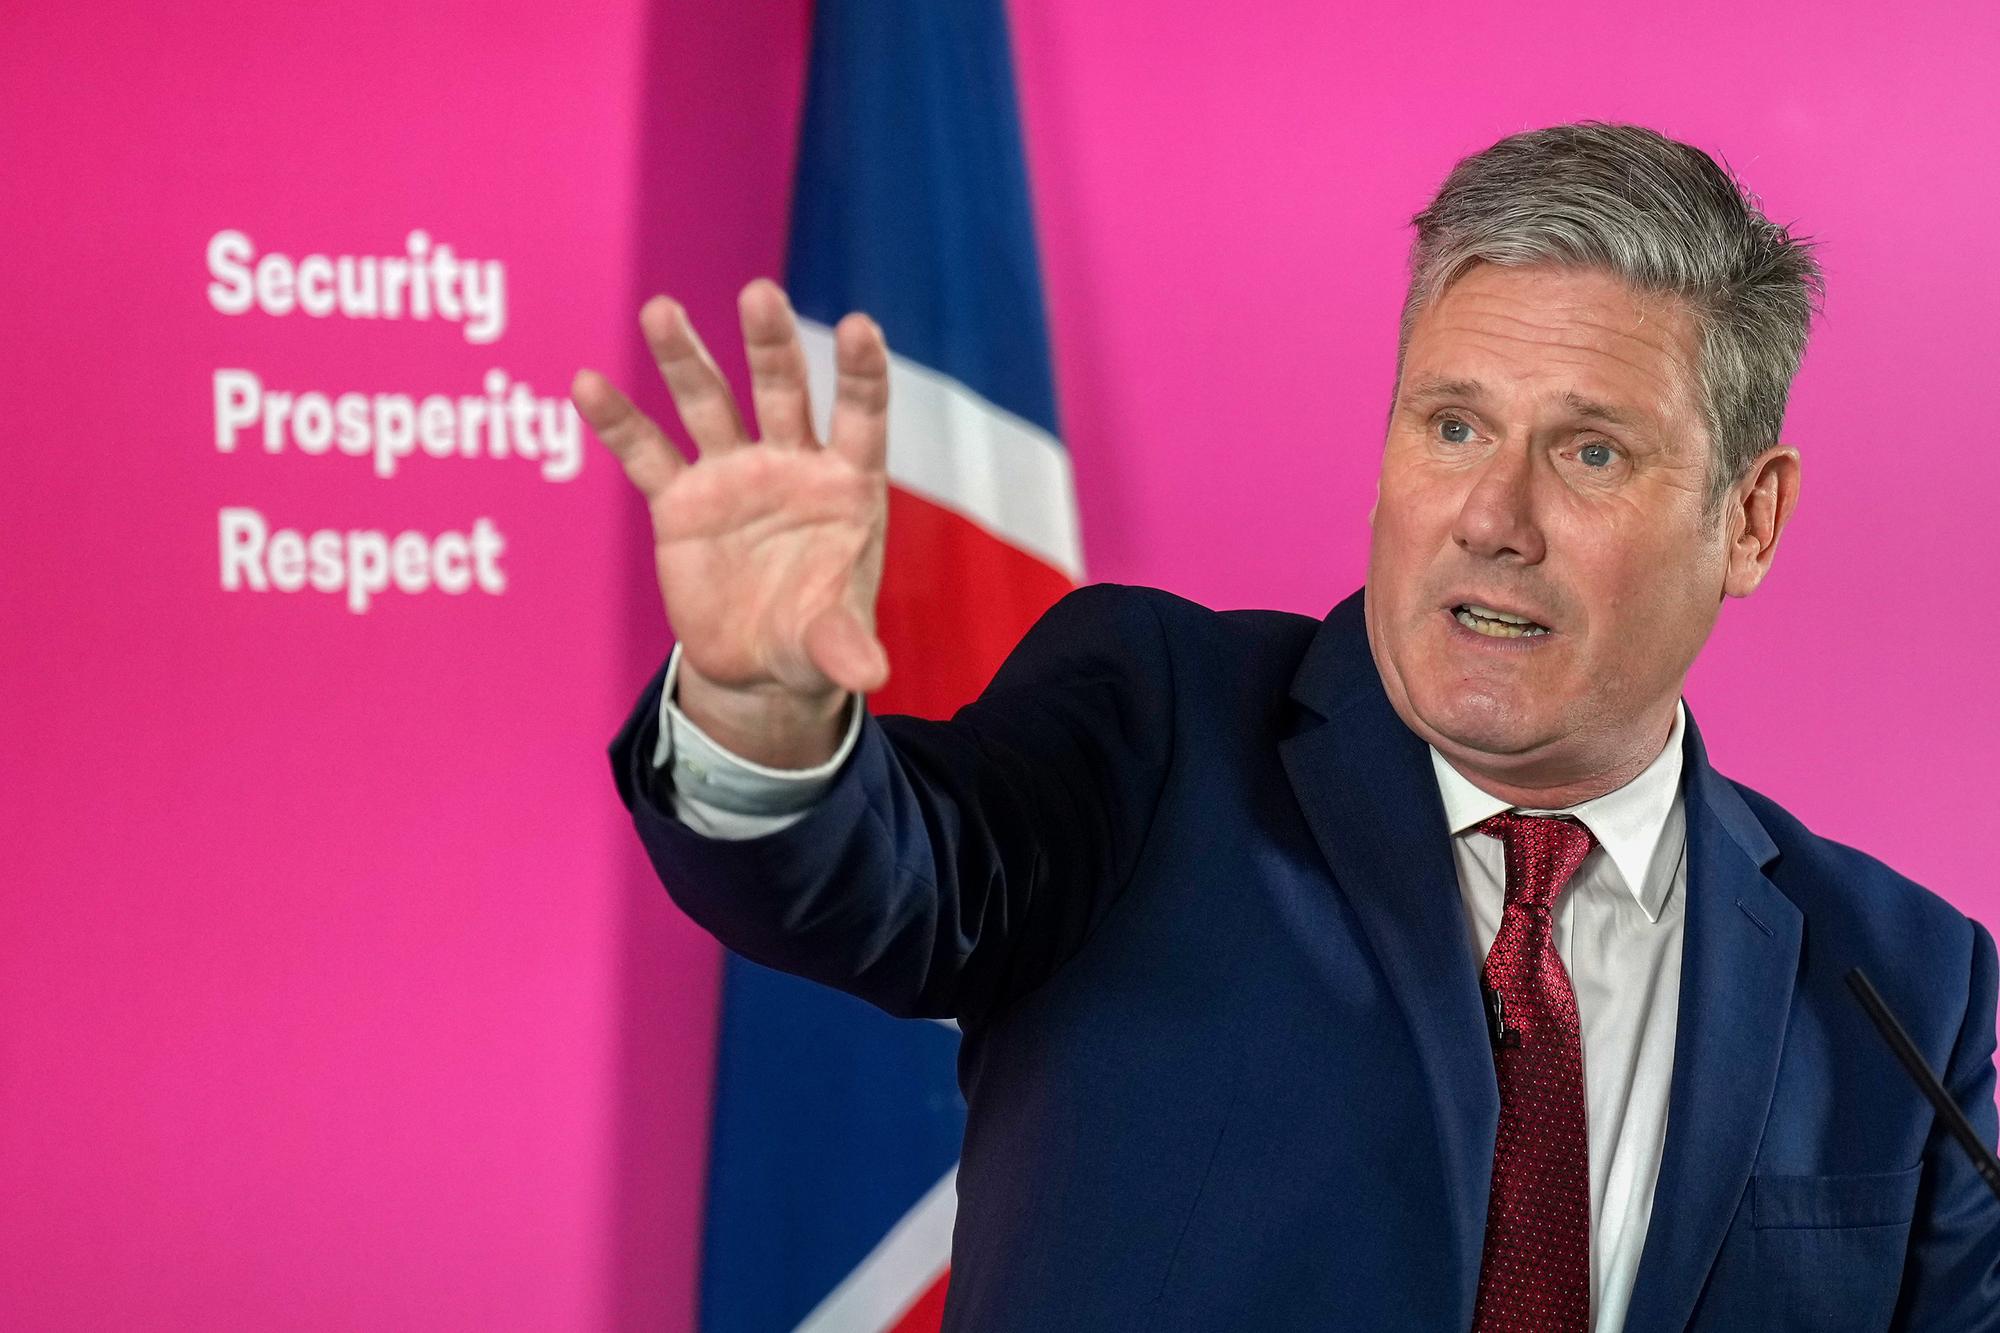 if keir starmer's labour keeps moving to the right, disillusionment with democracy will grow – joyce mcmillan